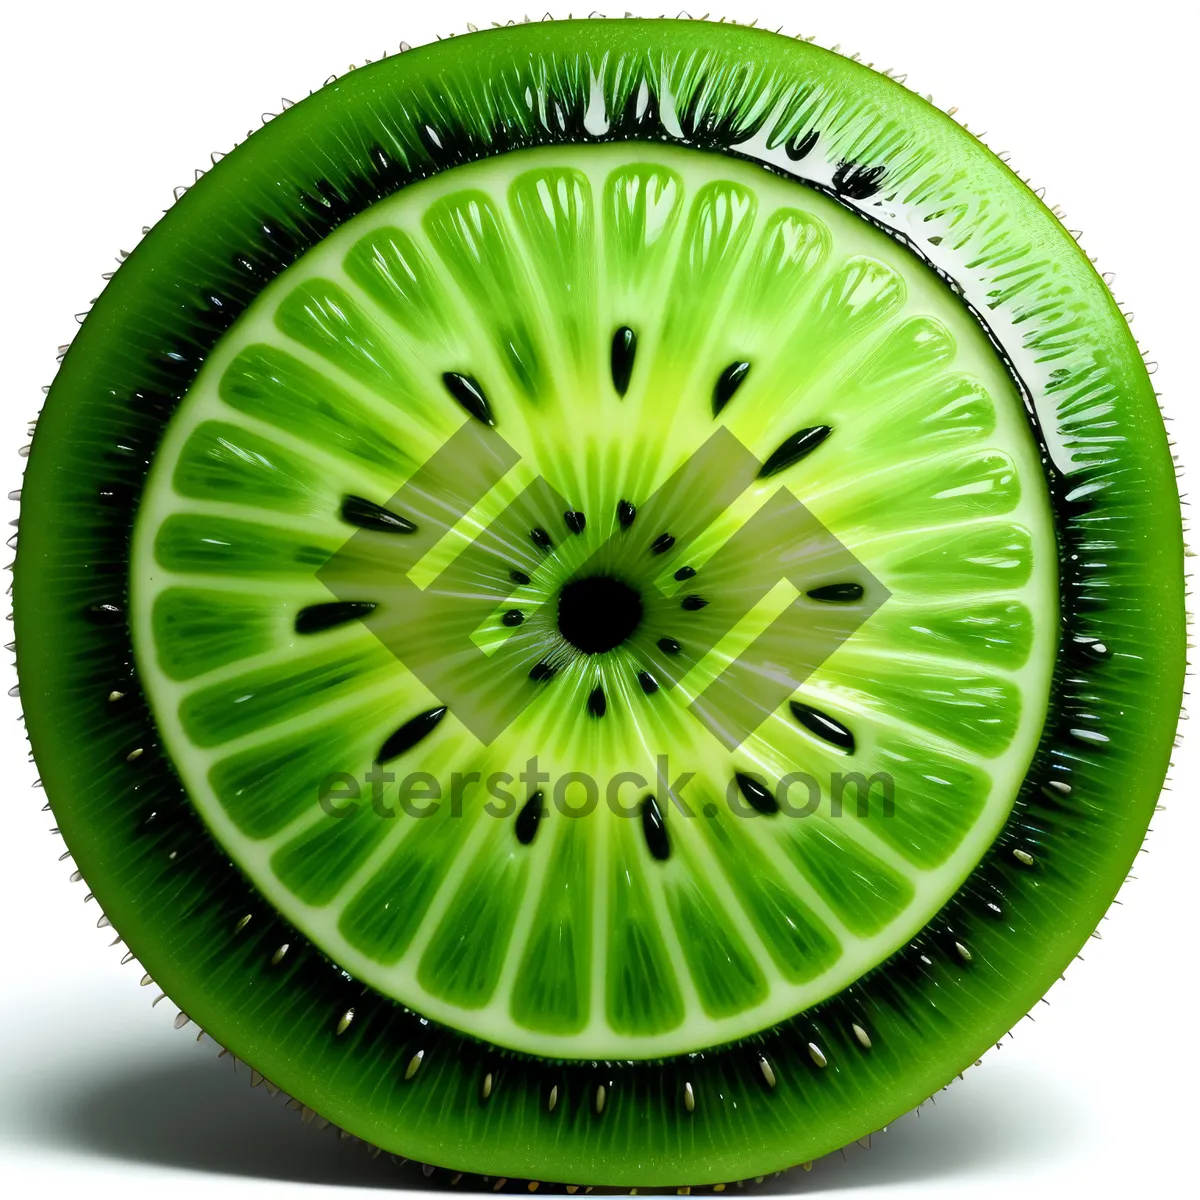 Picture of Refreshing Citrus Kiwi Fruit Slice: Juicy and Nutritious!